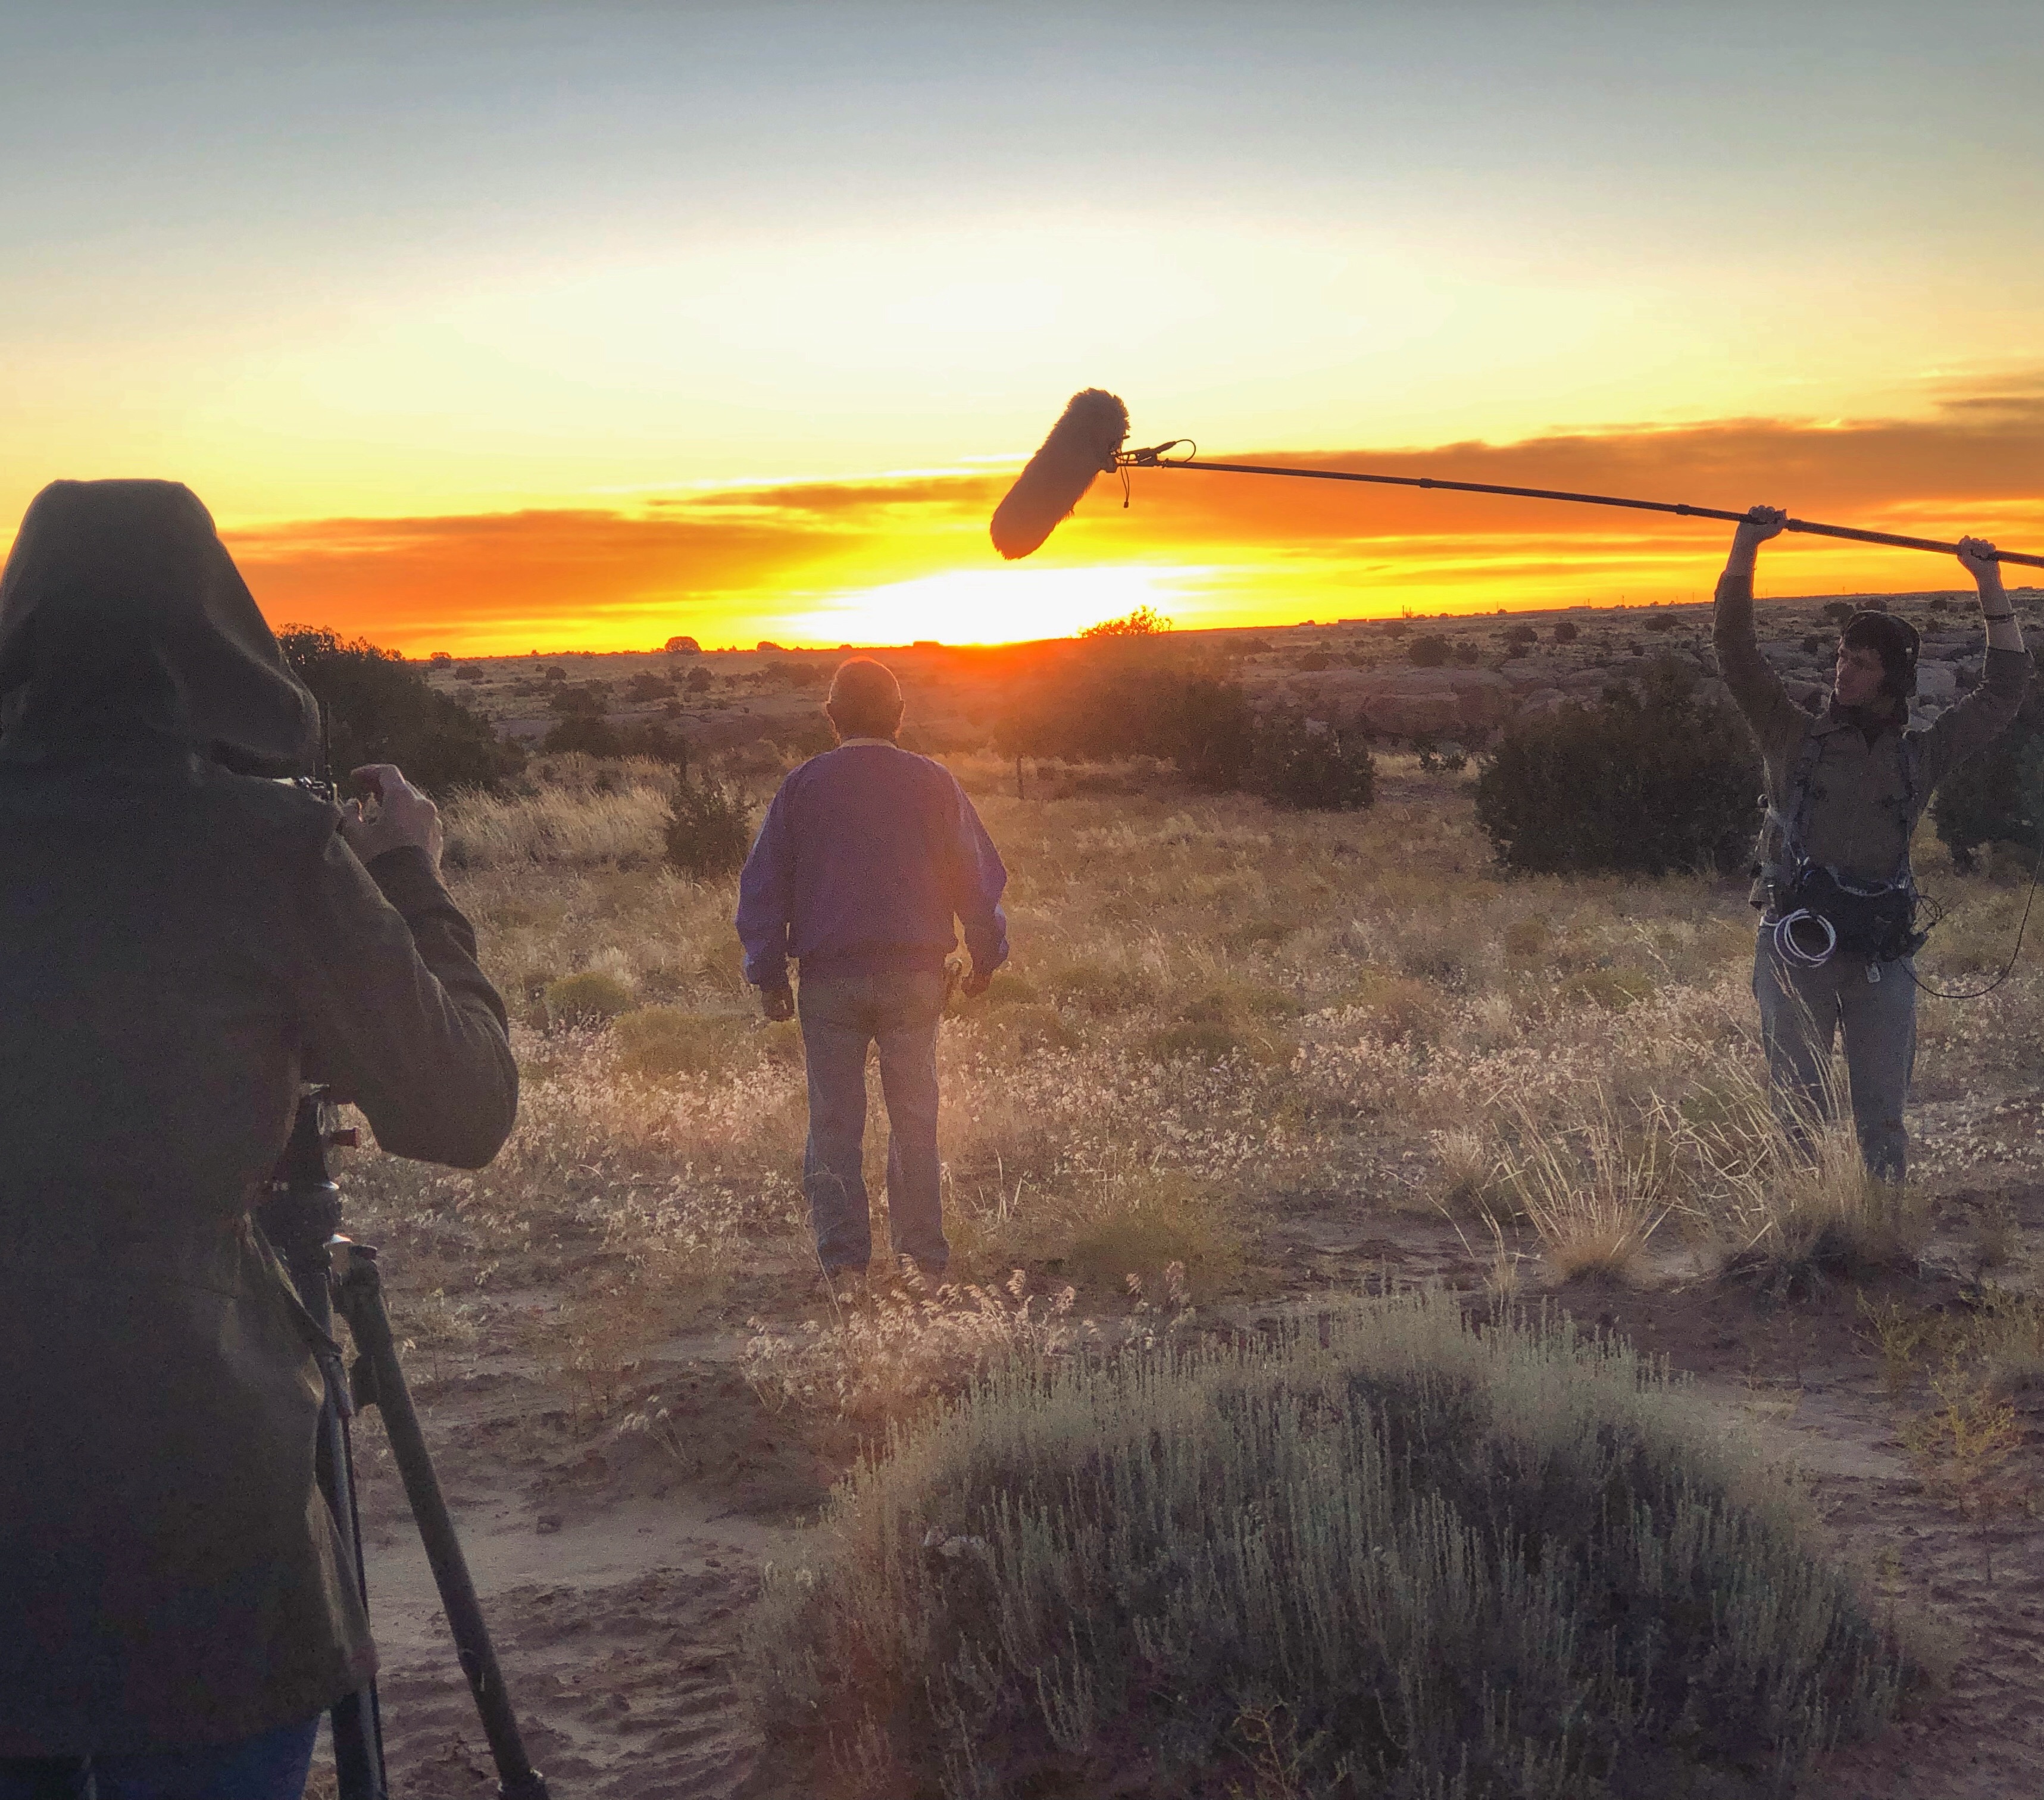 Shooting a scene in the sunset